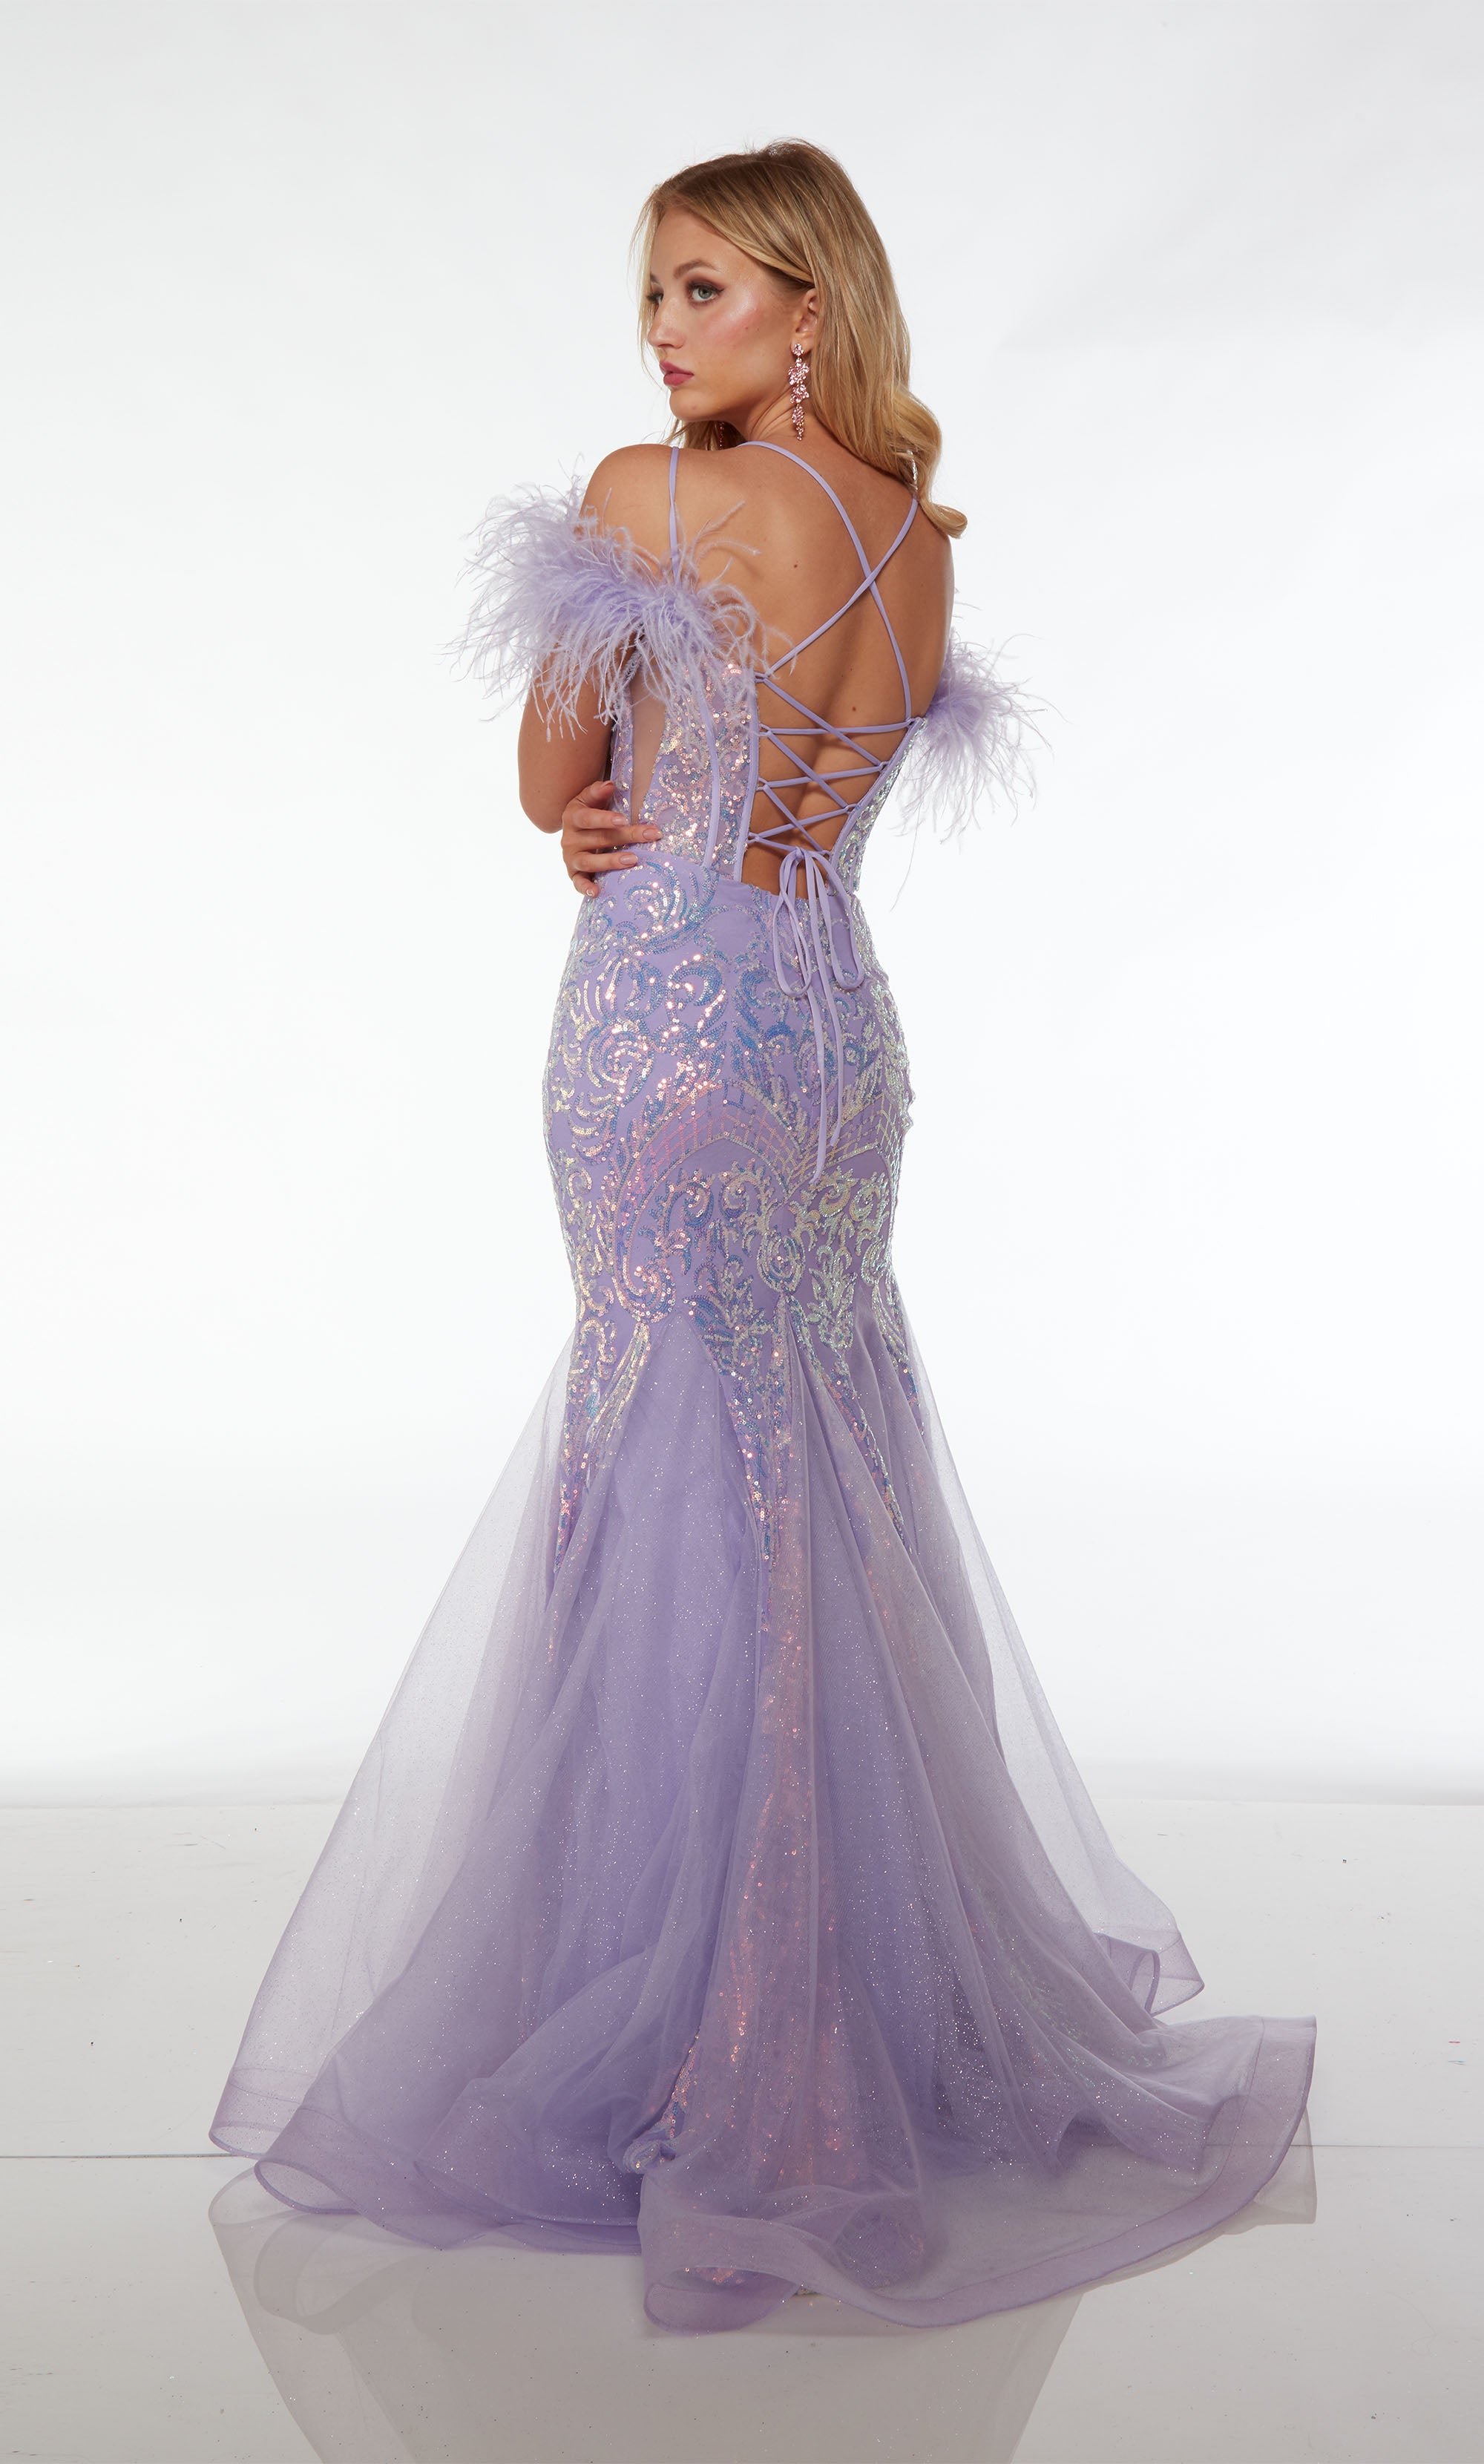 Purple prom dress with dual straps, feather trim, corset bodice, mermaid silhouette, iridescent sequin detailing, and crisscross lace-up back.